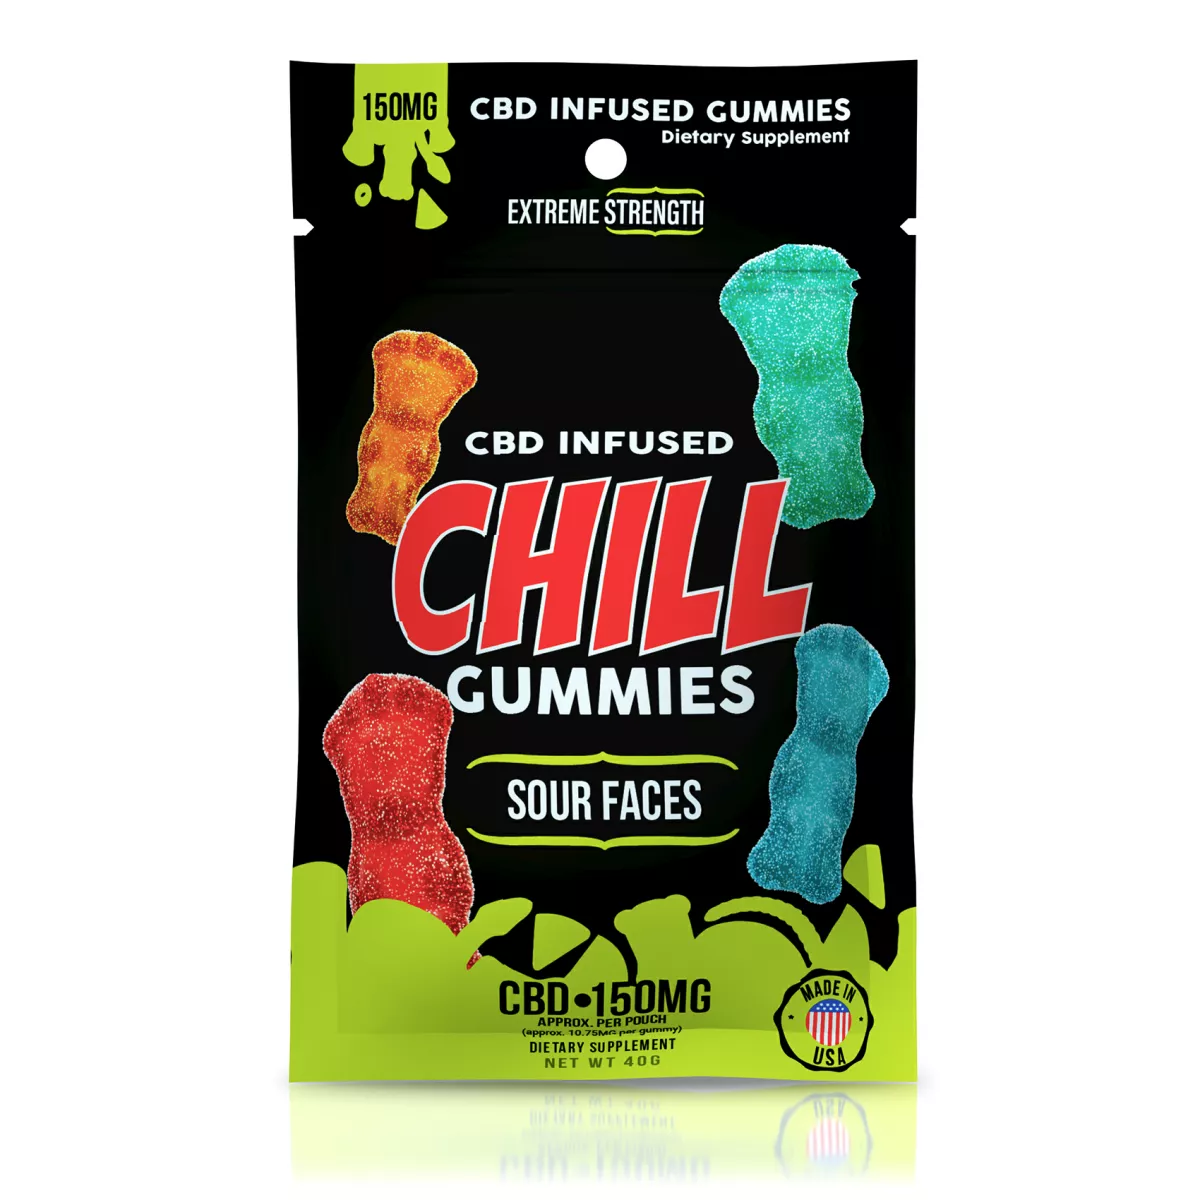 Gummies - CBD Infused Sour Faces - 150mg logo